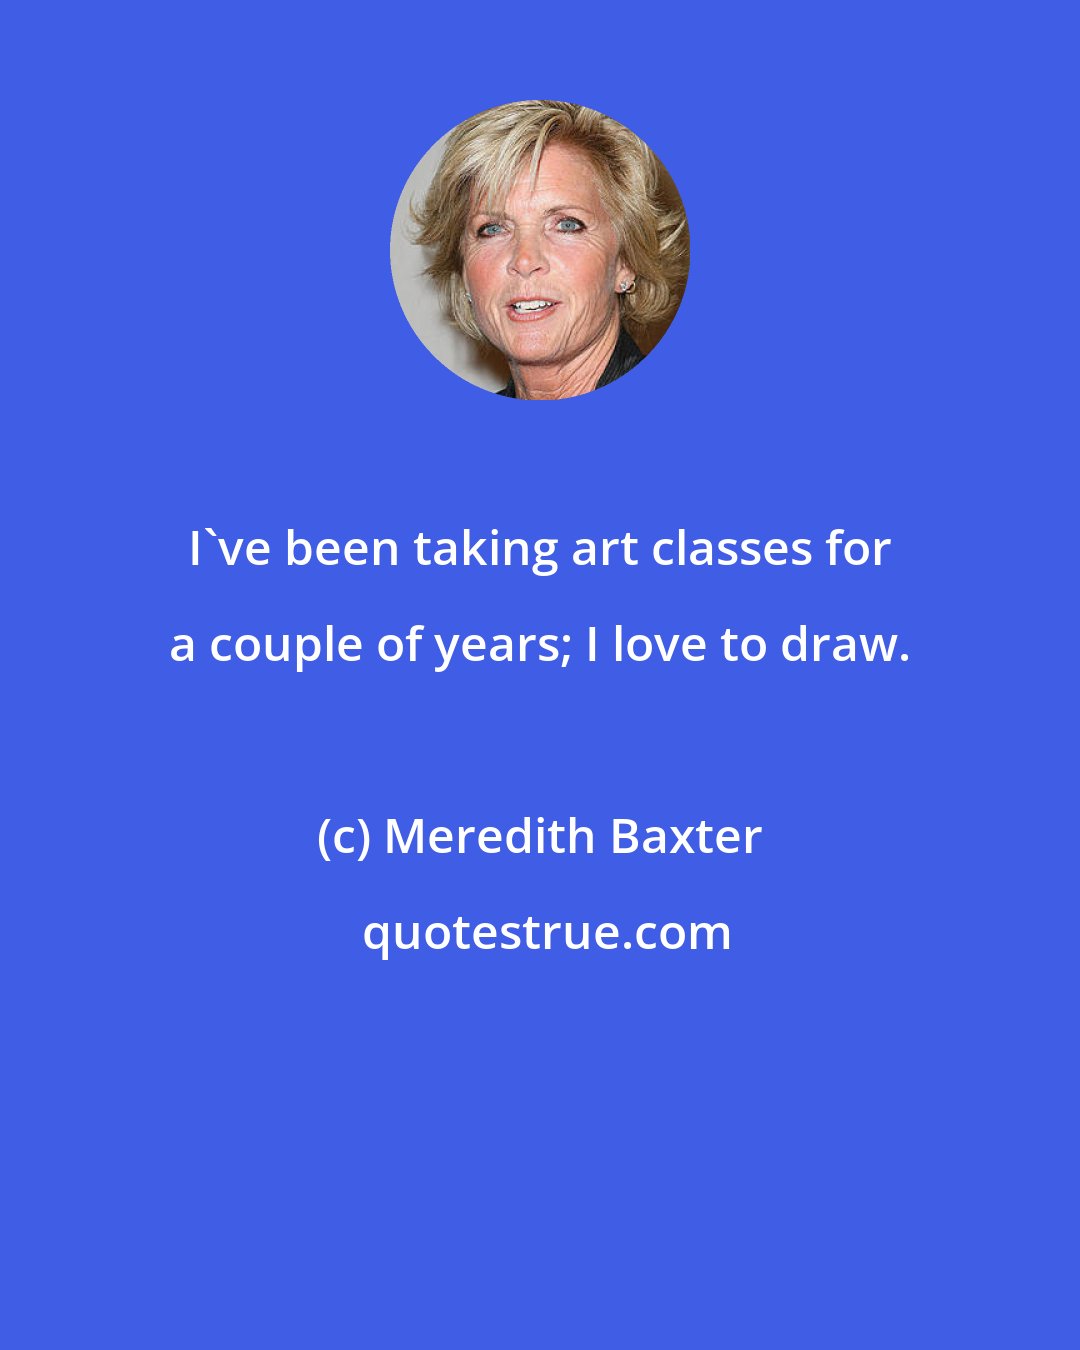 Meredith Baxter: I've been taking art classes for a couple of years; I love to draw.